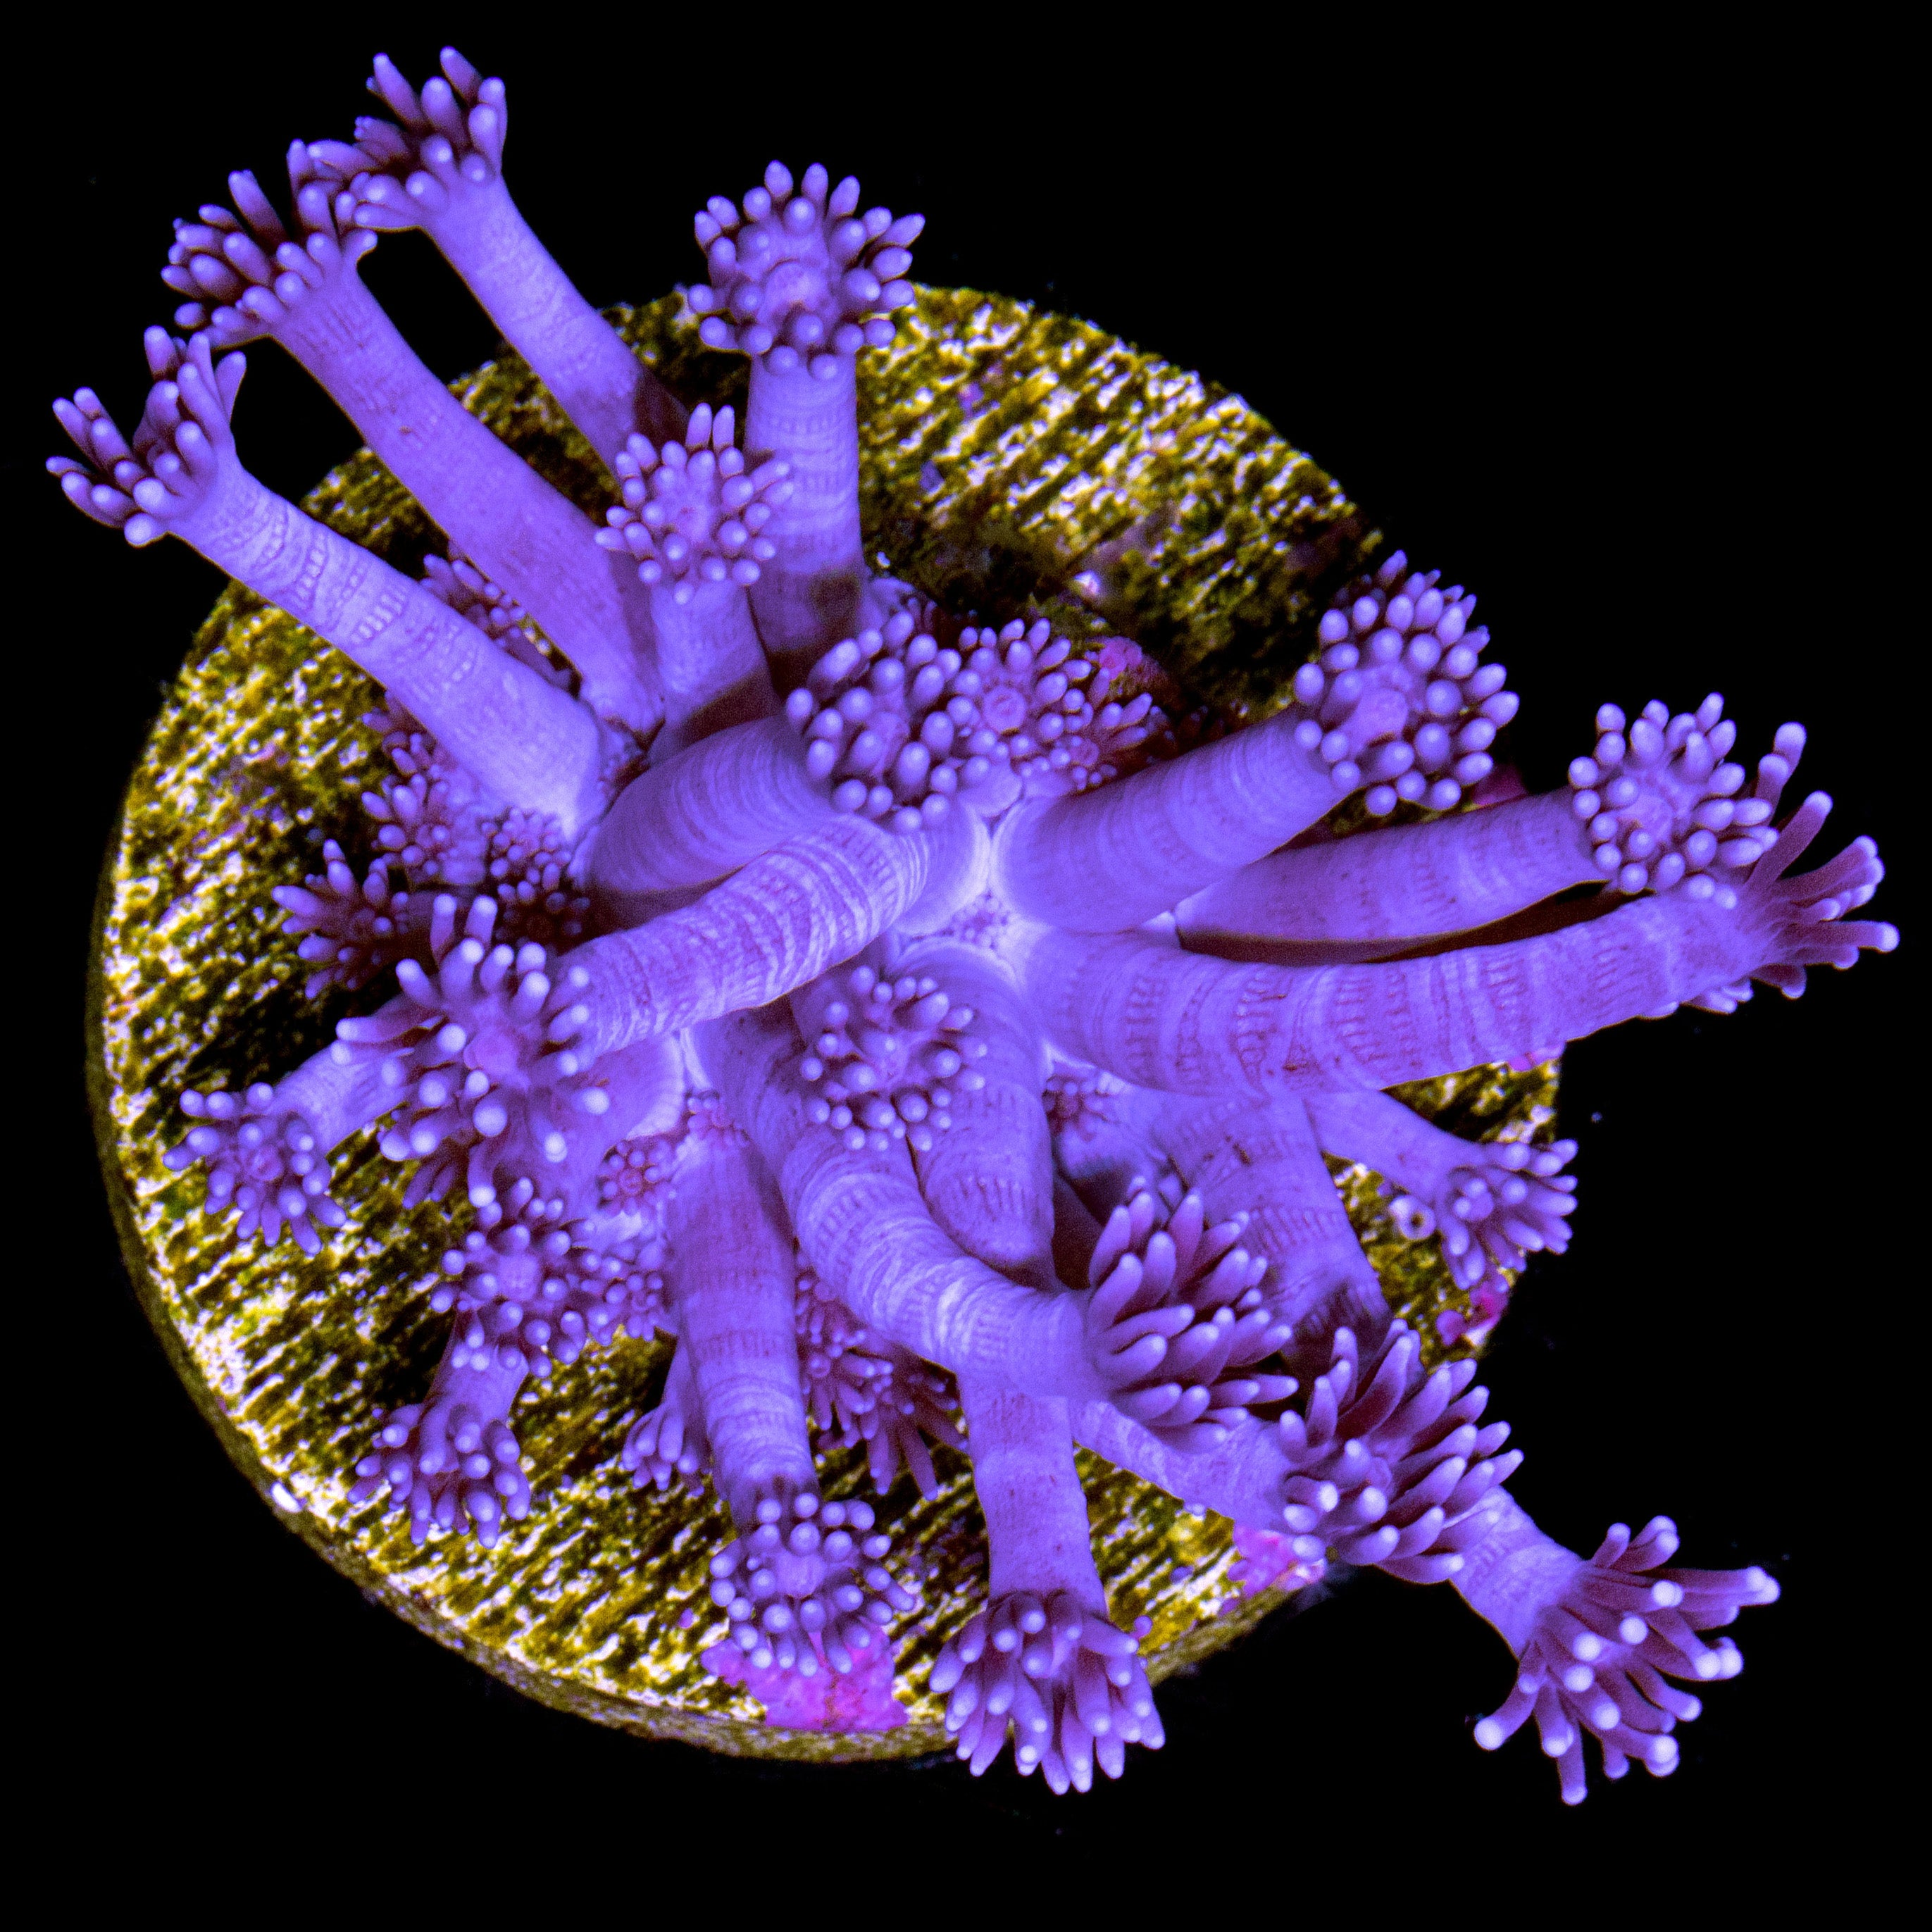 WYSIWYG LPS Coral Frags